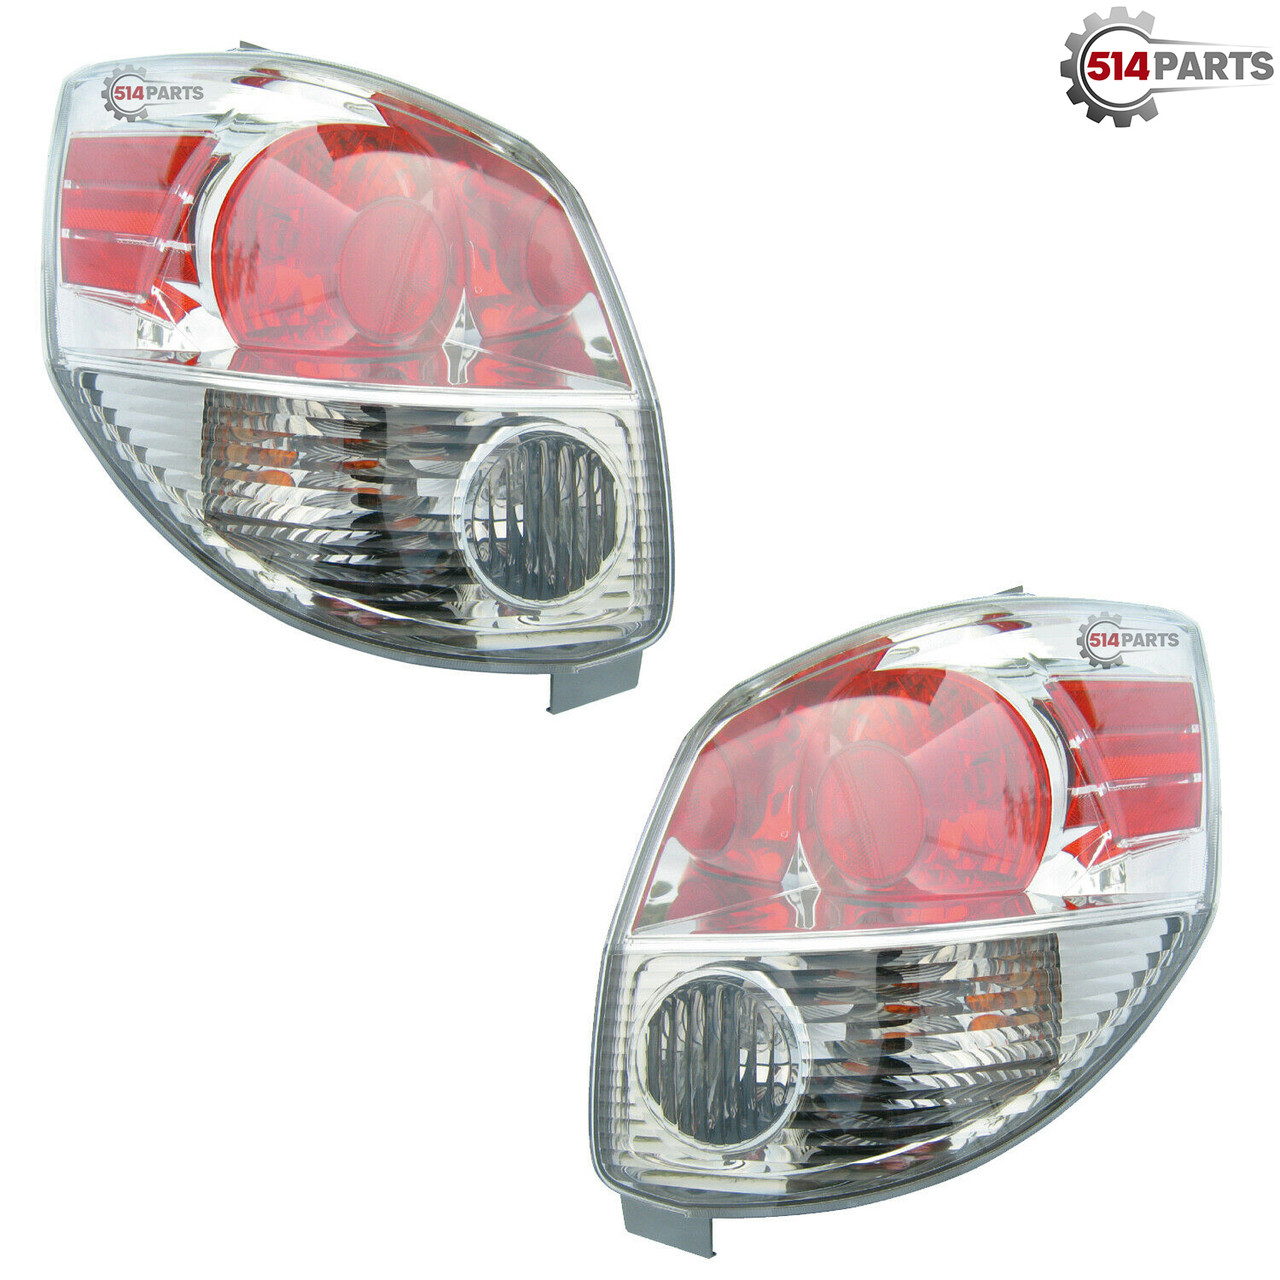 2005 - 2008 TOYOTA MATRIX TAIL LIGHTS High Quality - PHARES ARRIERE Haute Qualite